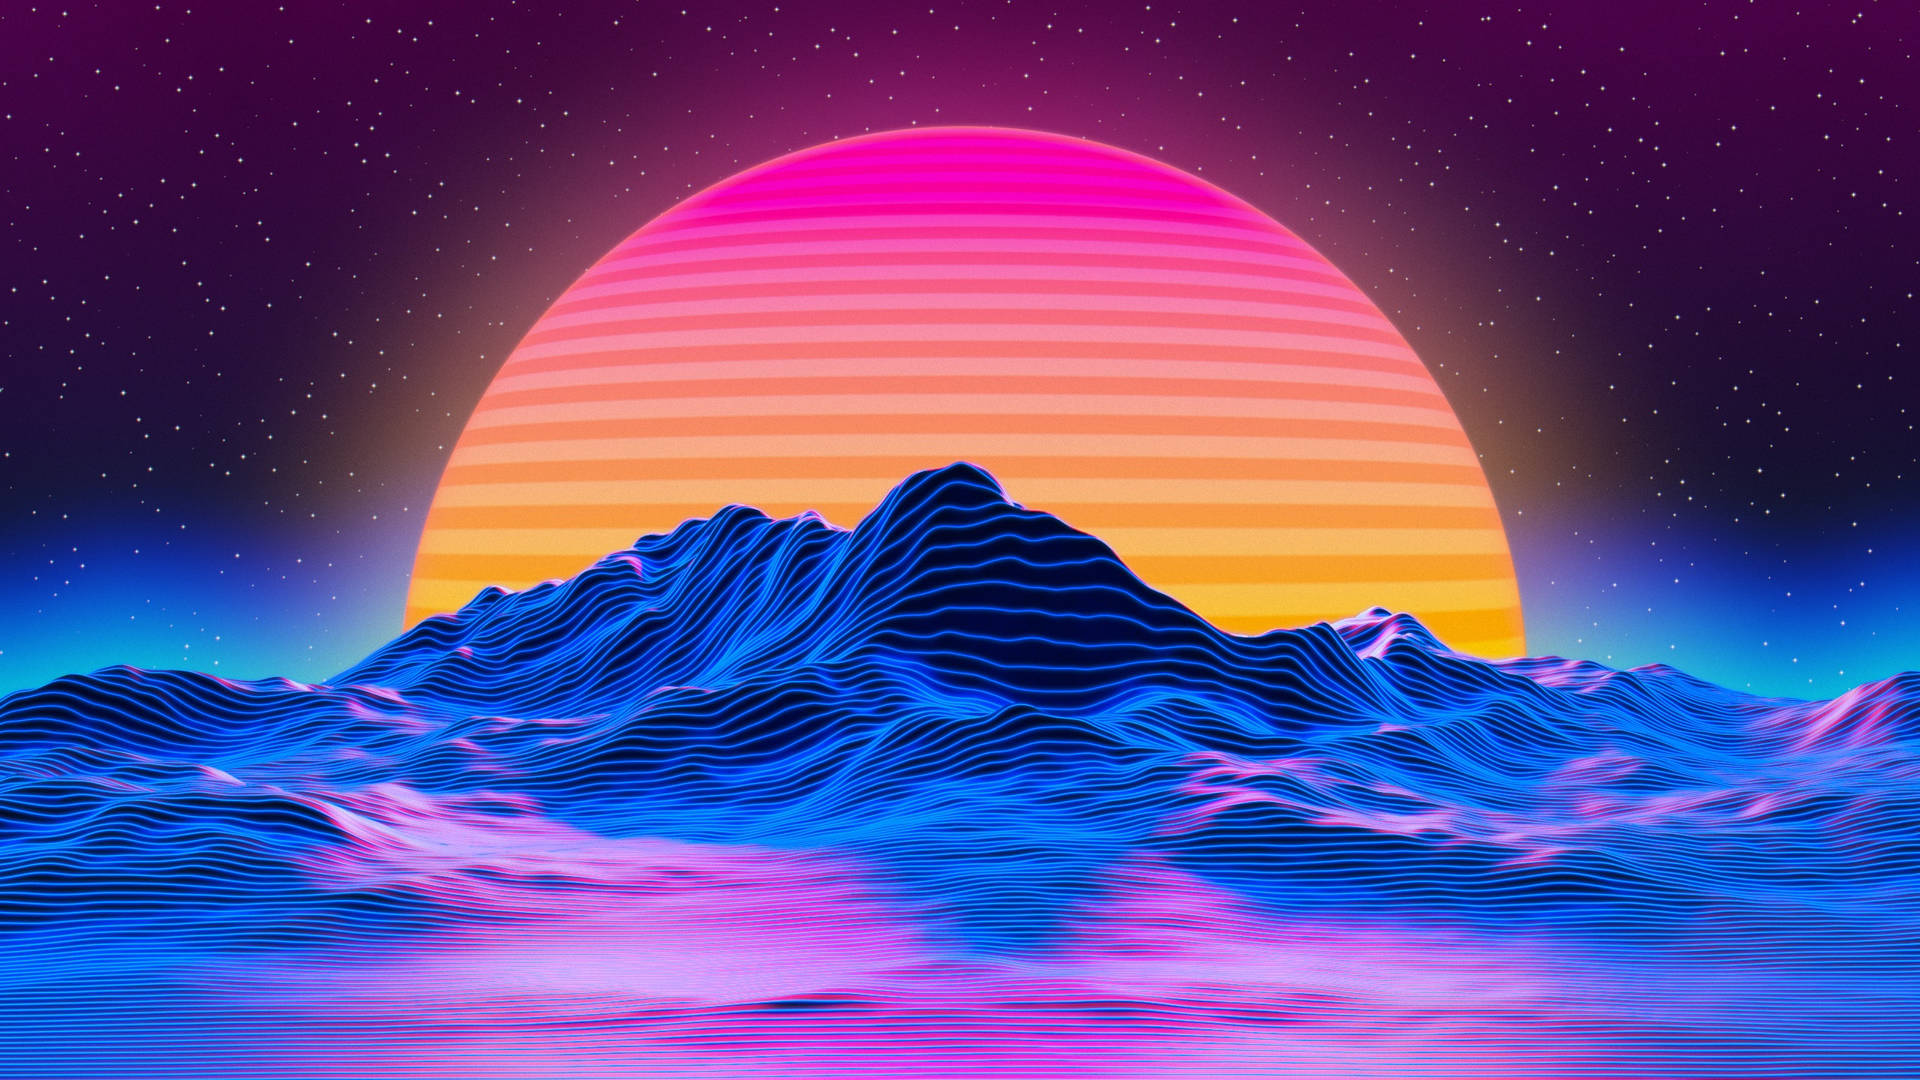 A Colorful Sunrise Over A Mountain Wallpaper